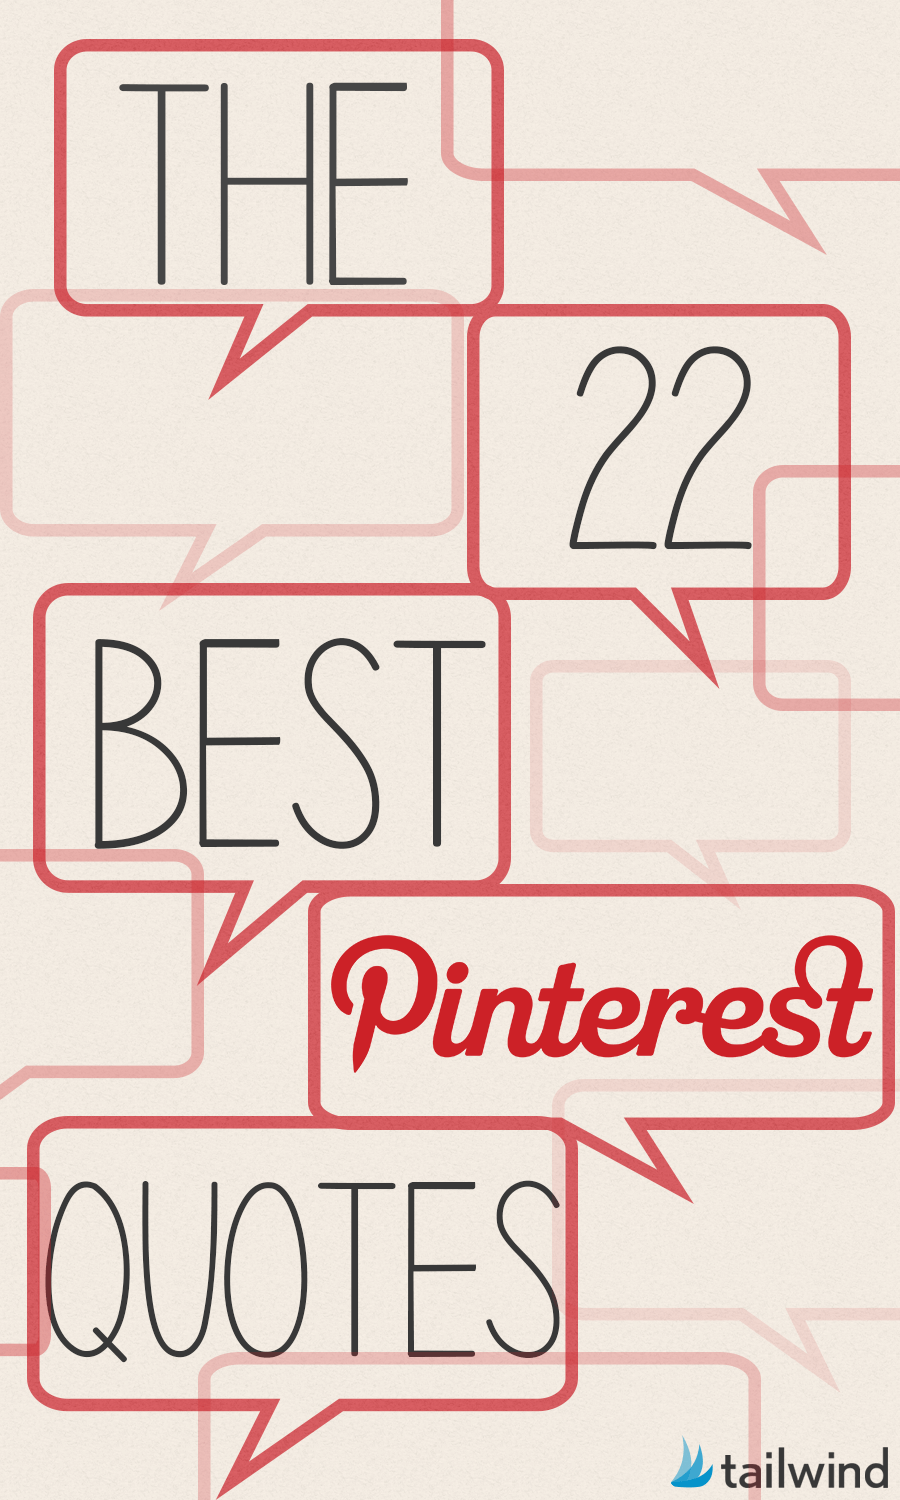 The 22 Best Pinterest Quotes to Brighten Your Day - Tailwind Blog